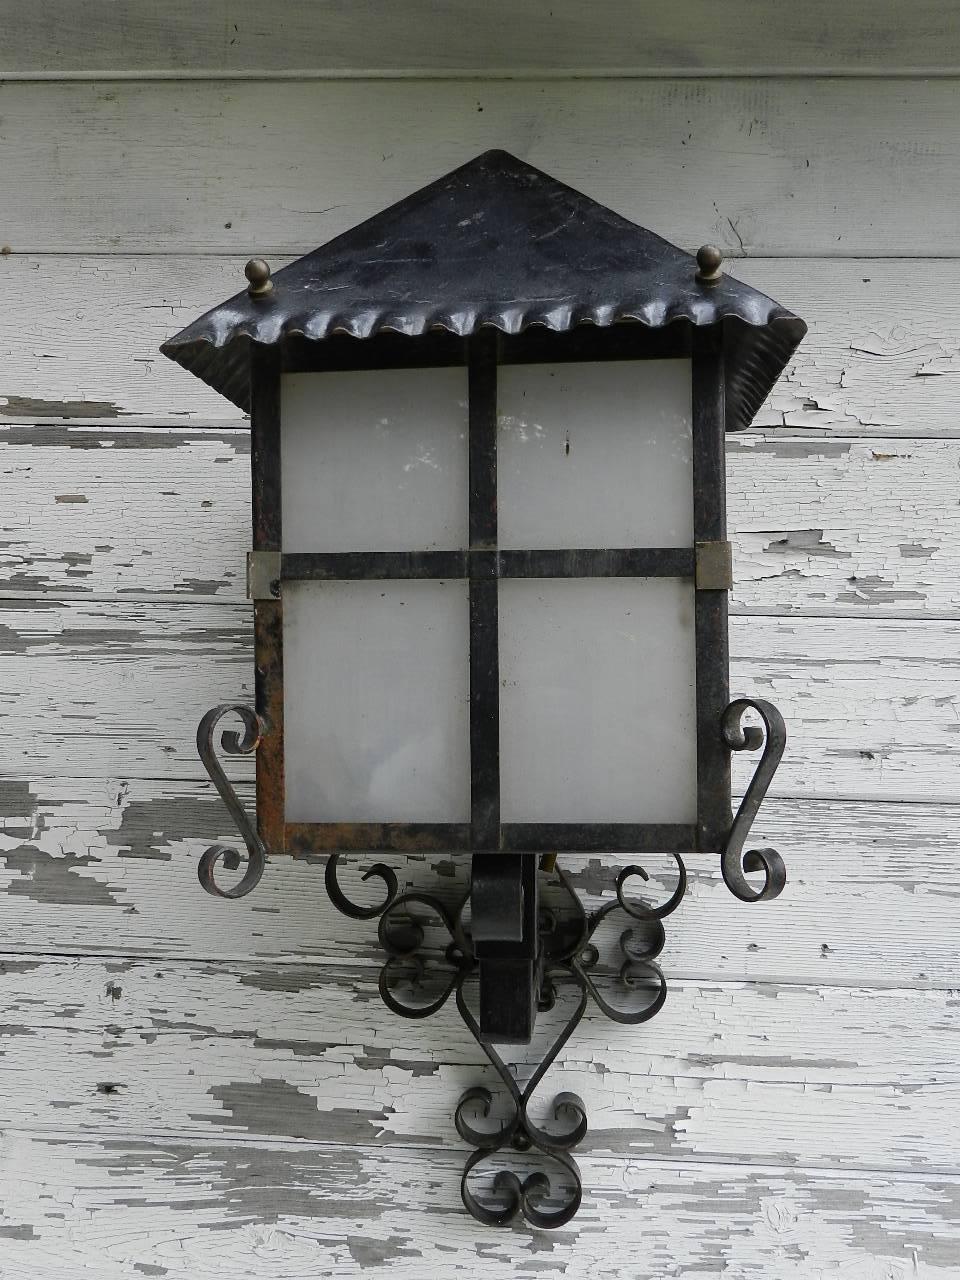 20th Century French Lantern Wall Light Outdoor Sconce Wrought Iron and Glass Exterior Porch